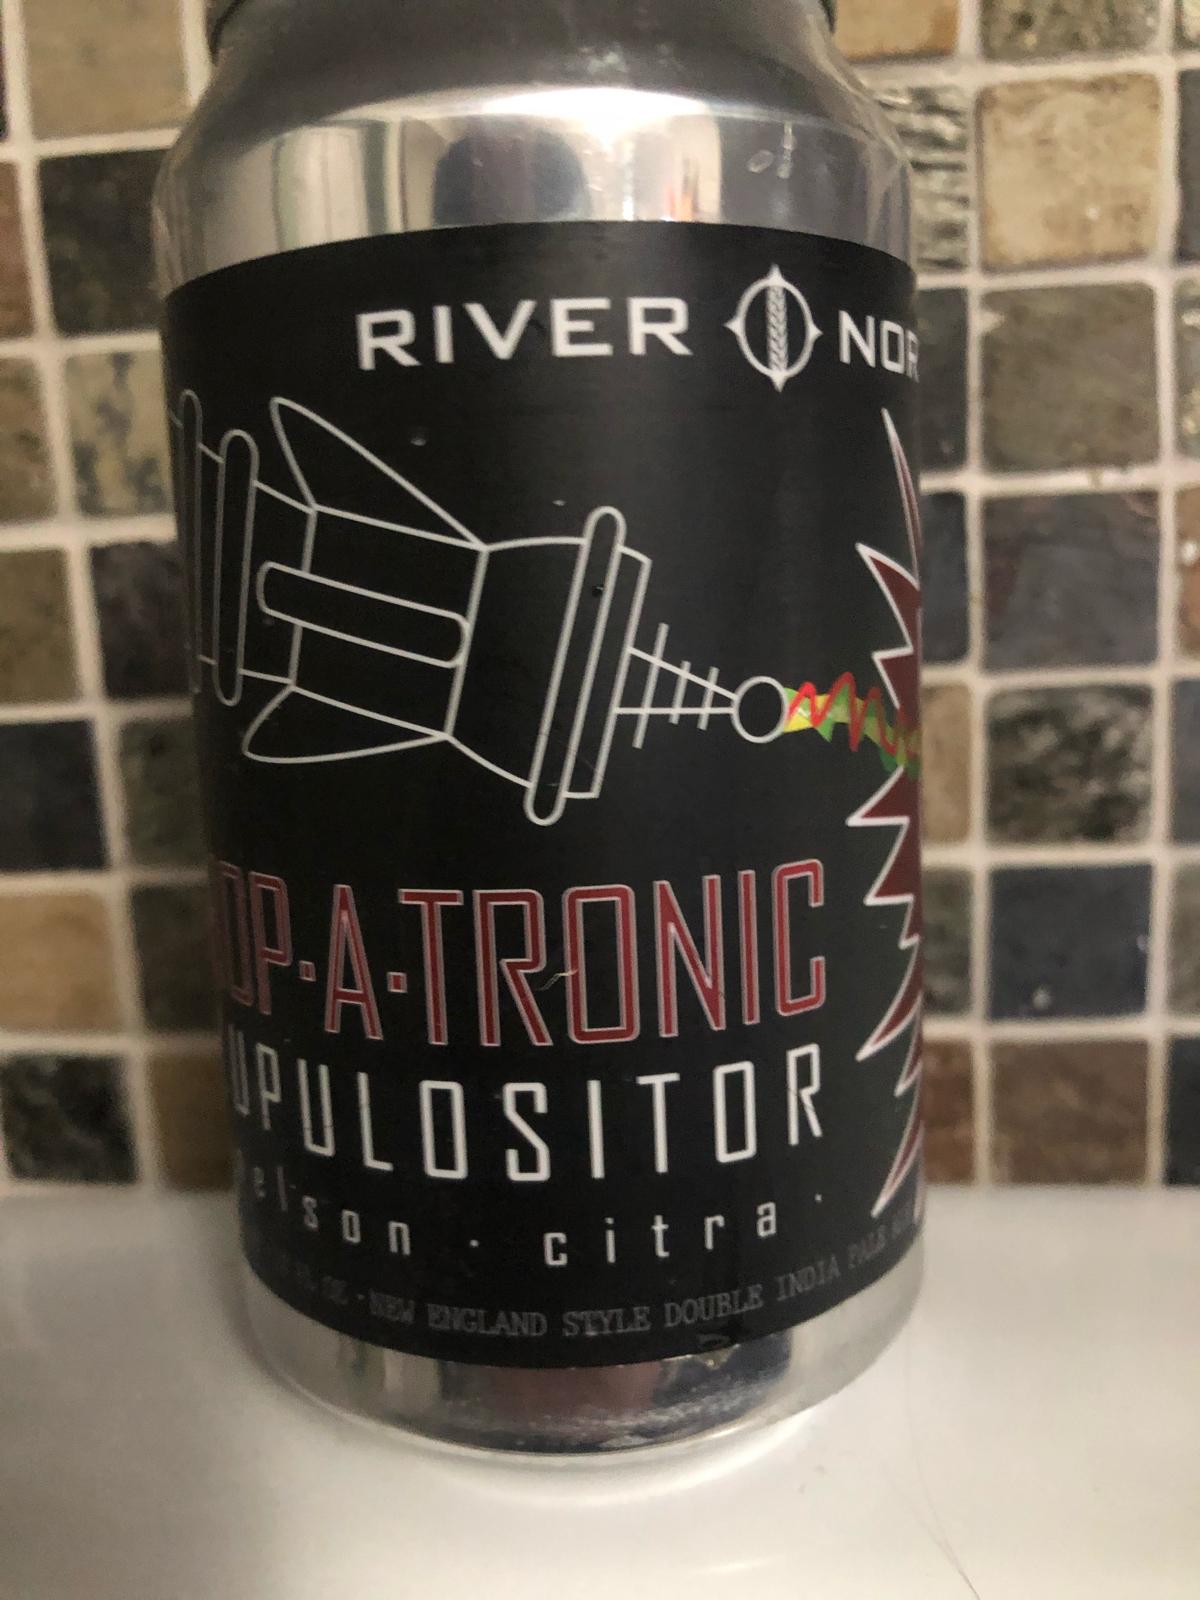 Hop-A-Tronic Lupulositor - Nelson & Citra